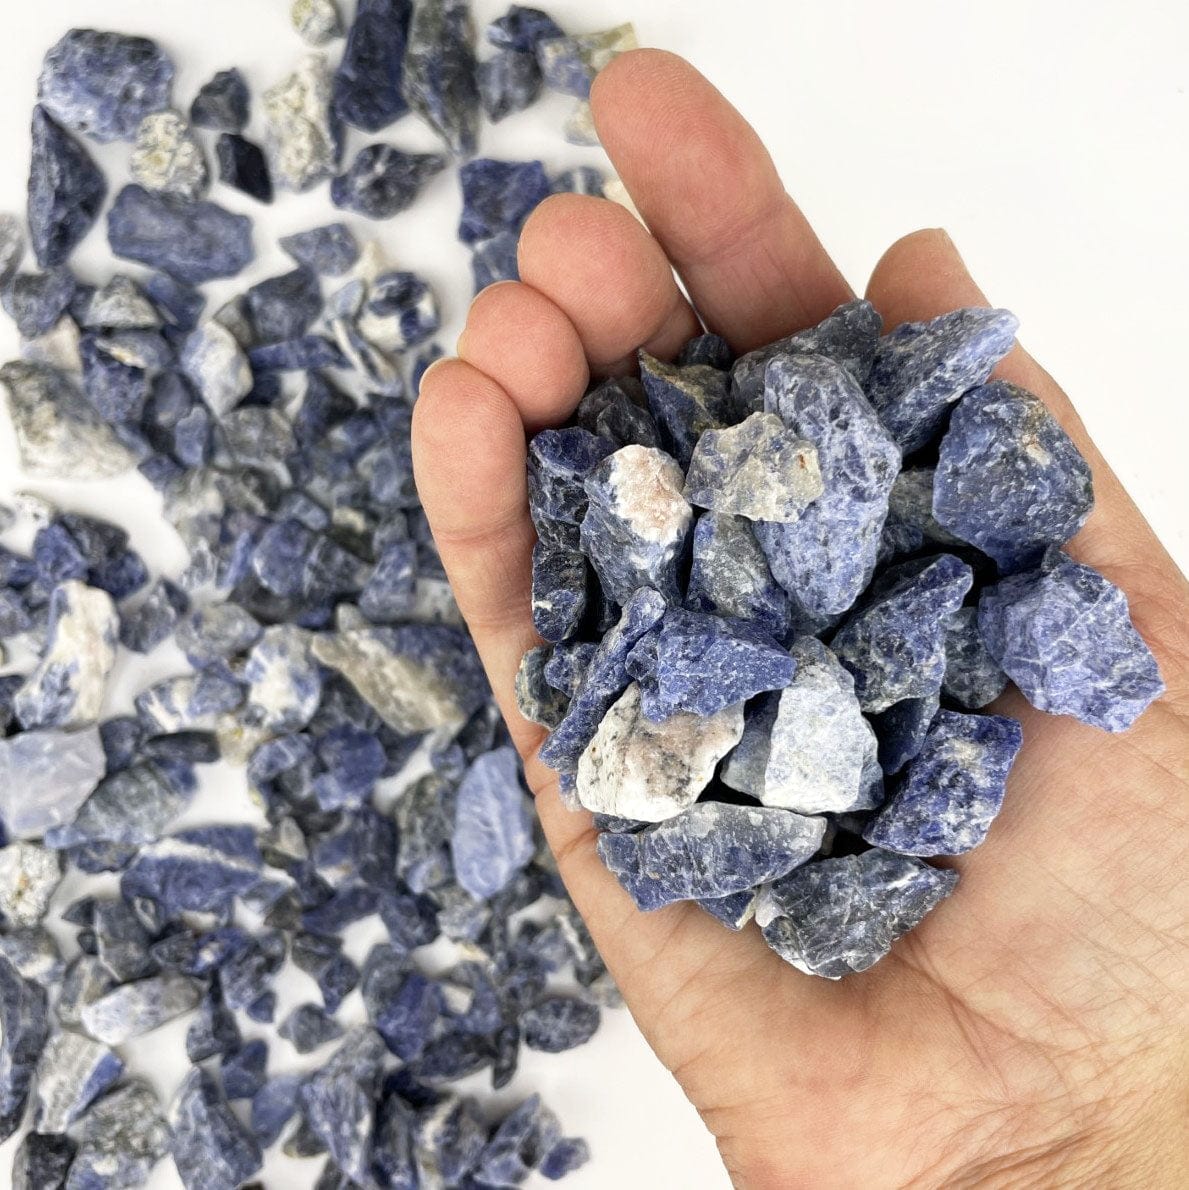 Sodalite Stones in a hand for size